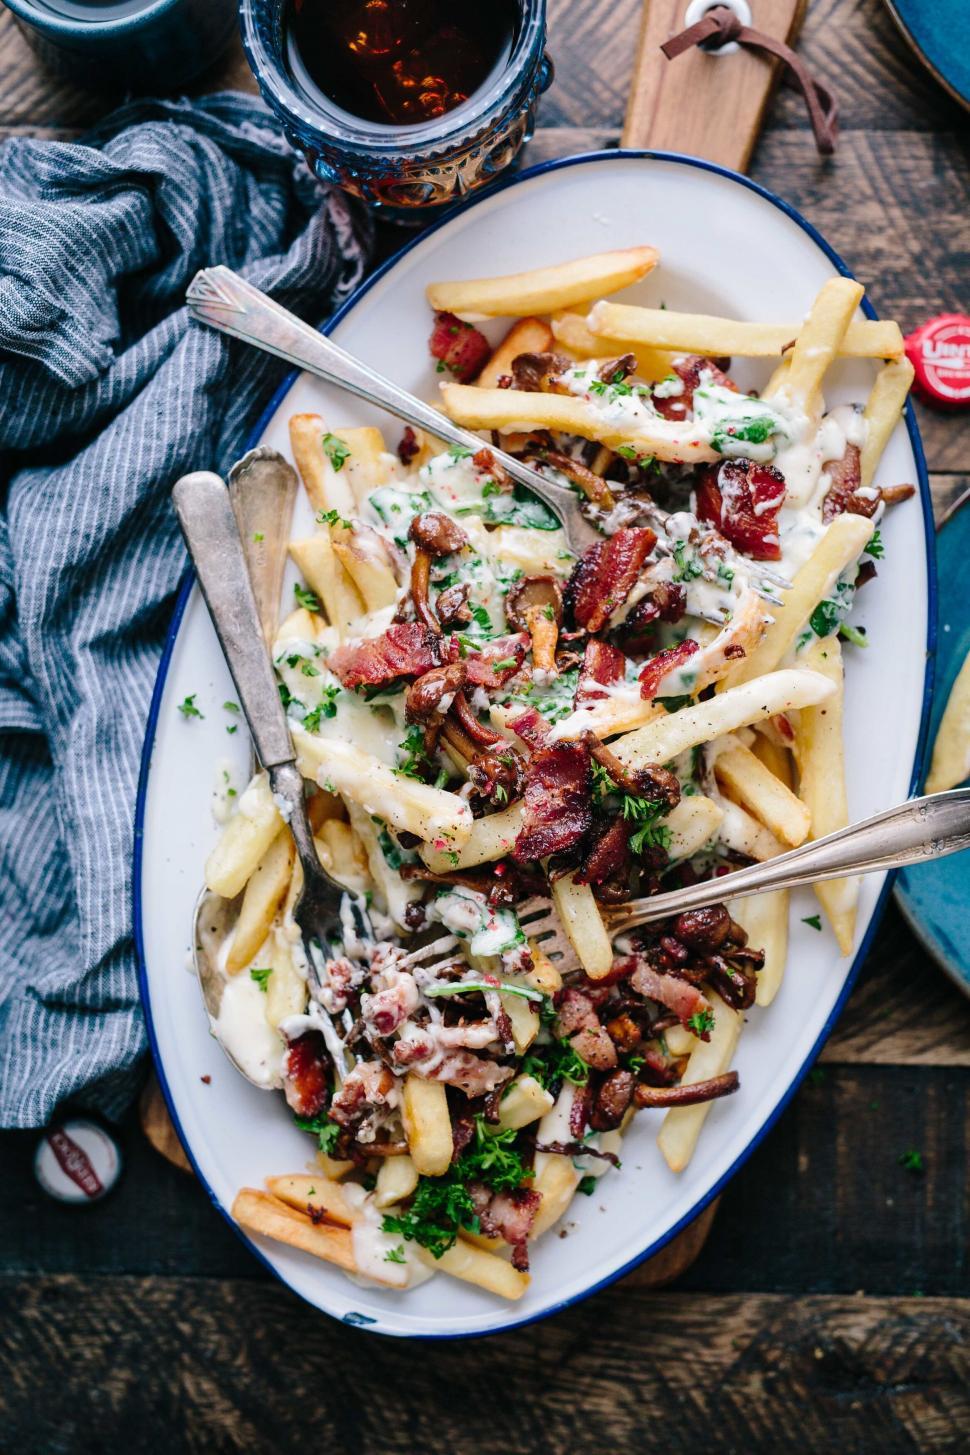 Free Image of Savory French fries with cheese and bacon 